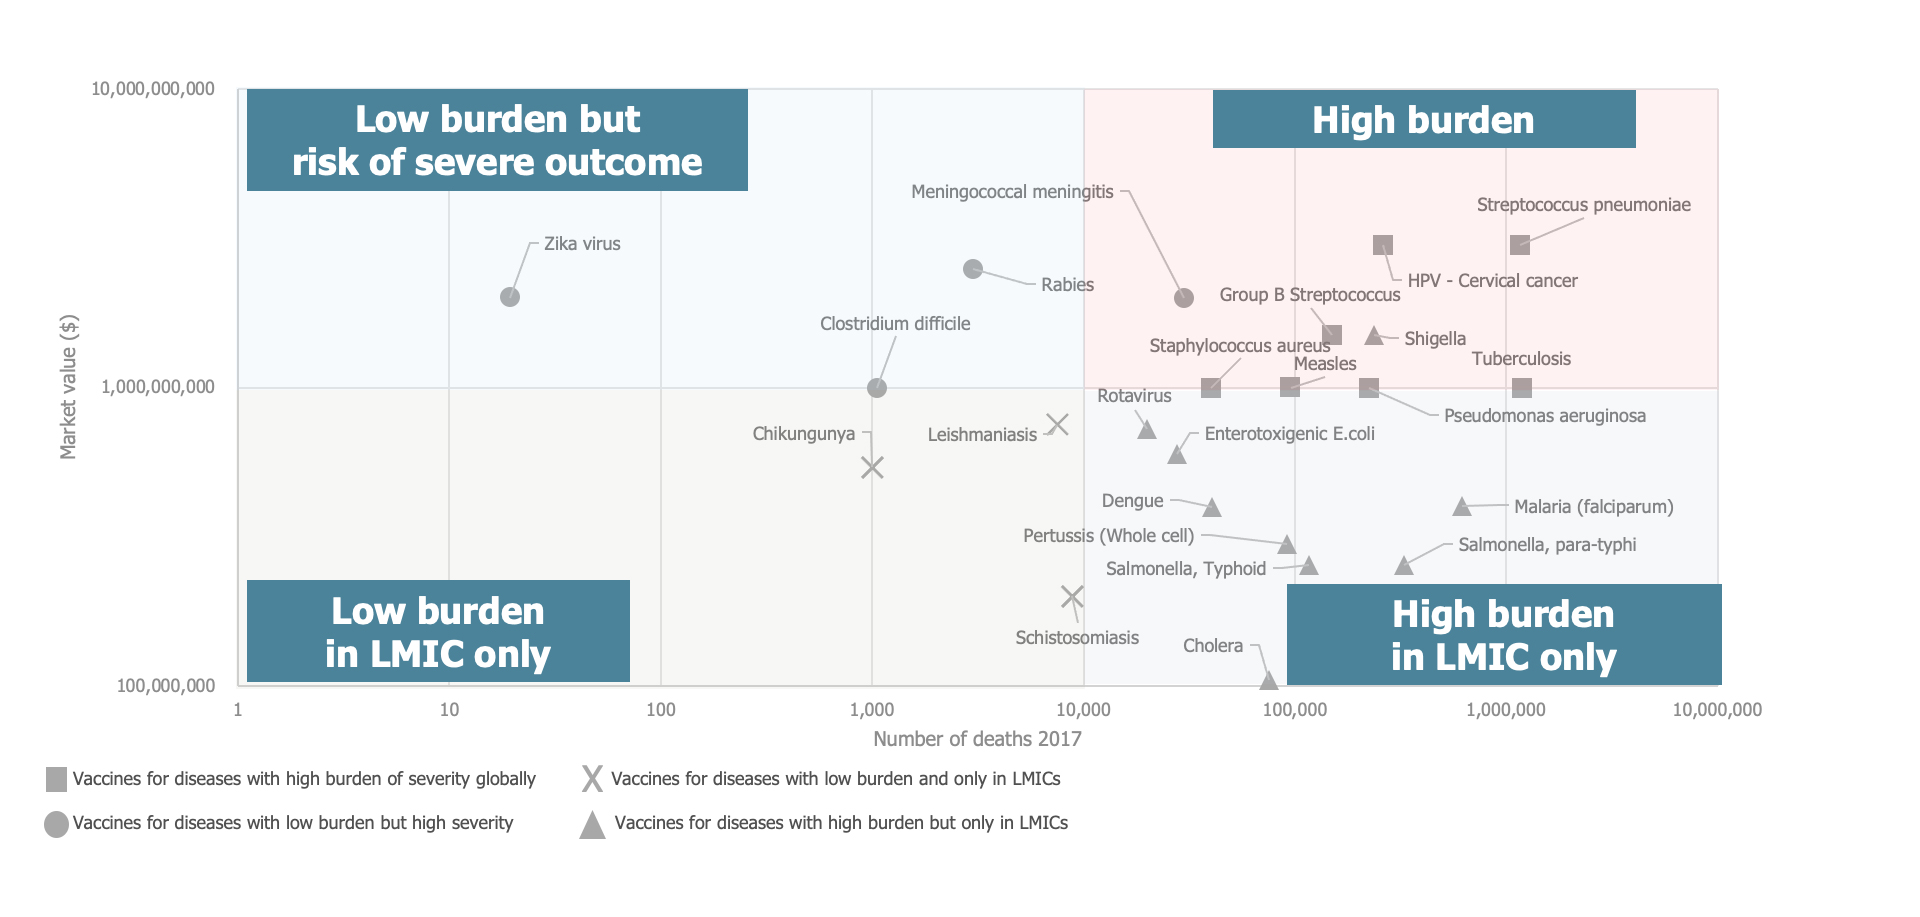 Figure 2. Clustering vaccines by burden of disease and income level

Source: MMGH Consulting for the Wellcome Trust, 2020
